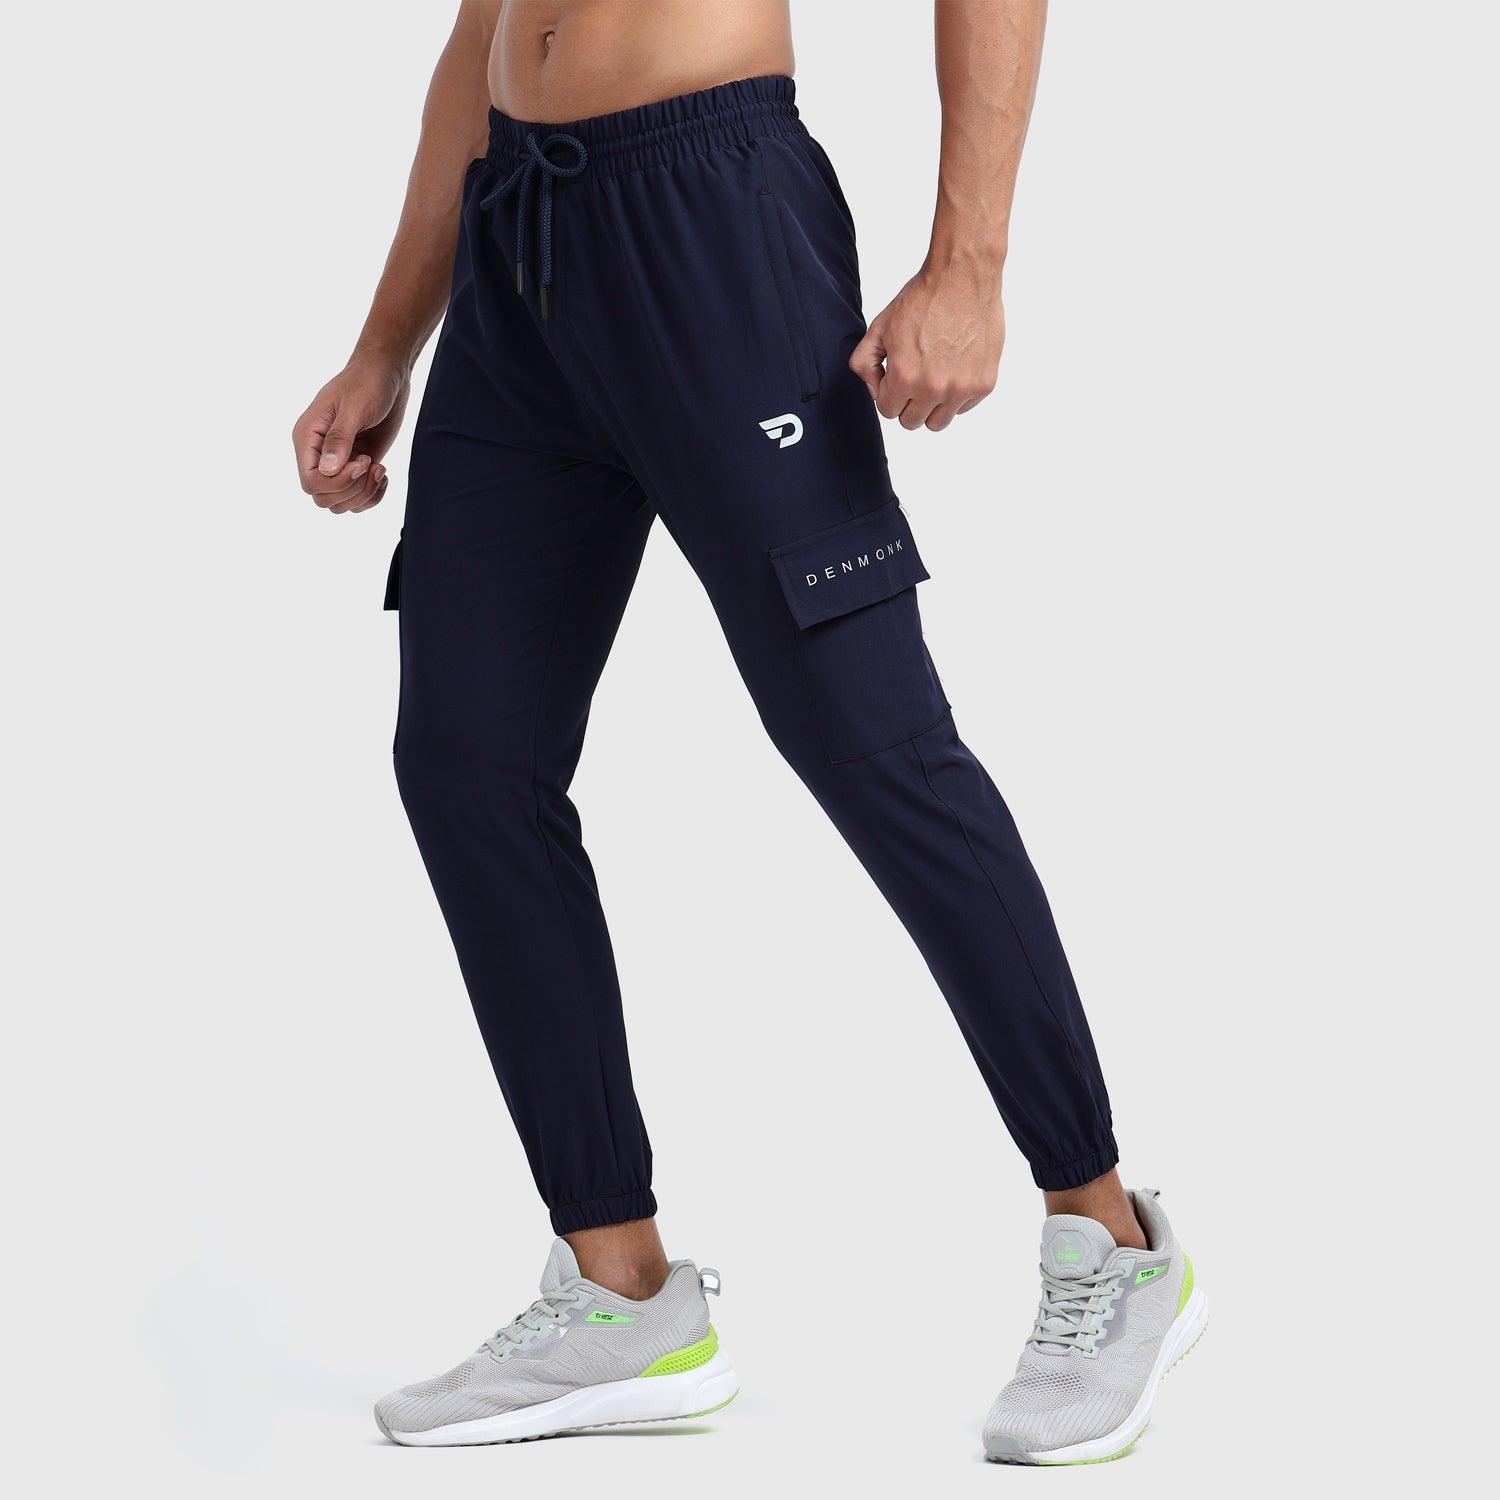 Denmonk: Elevate your look with these Cragopro sharp midnight navy Trackpant for mens.